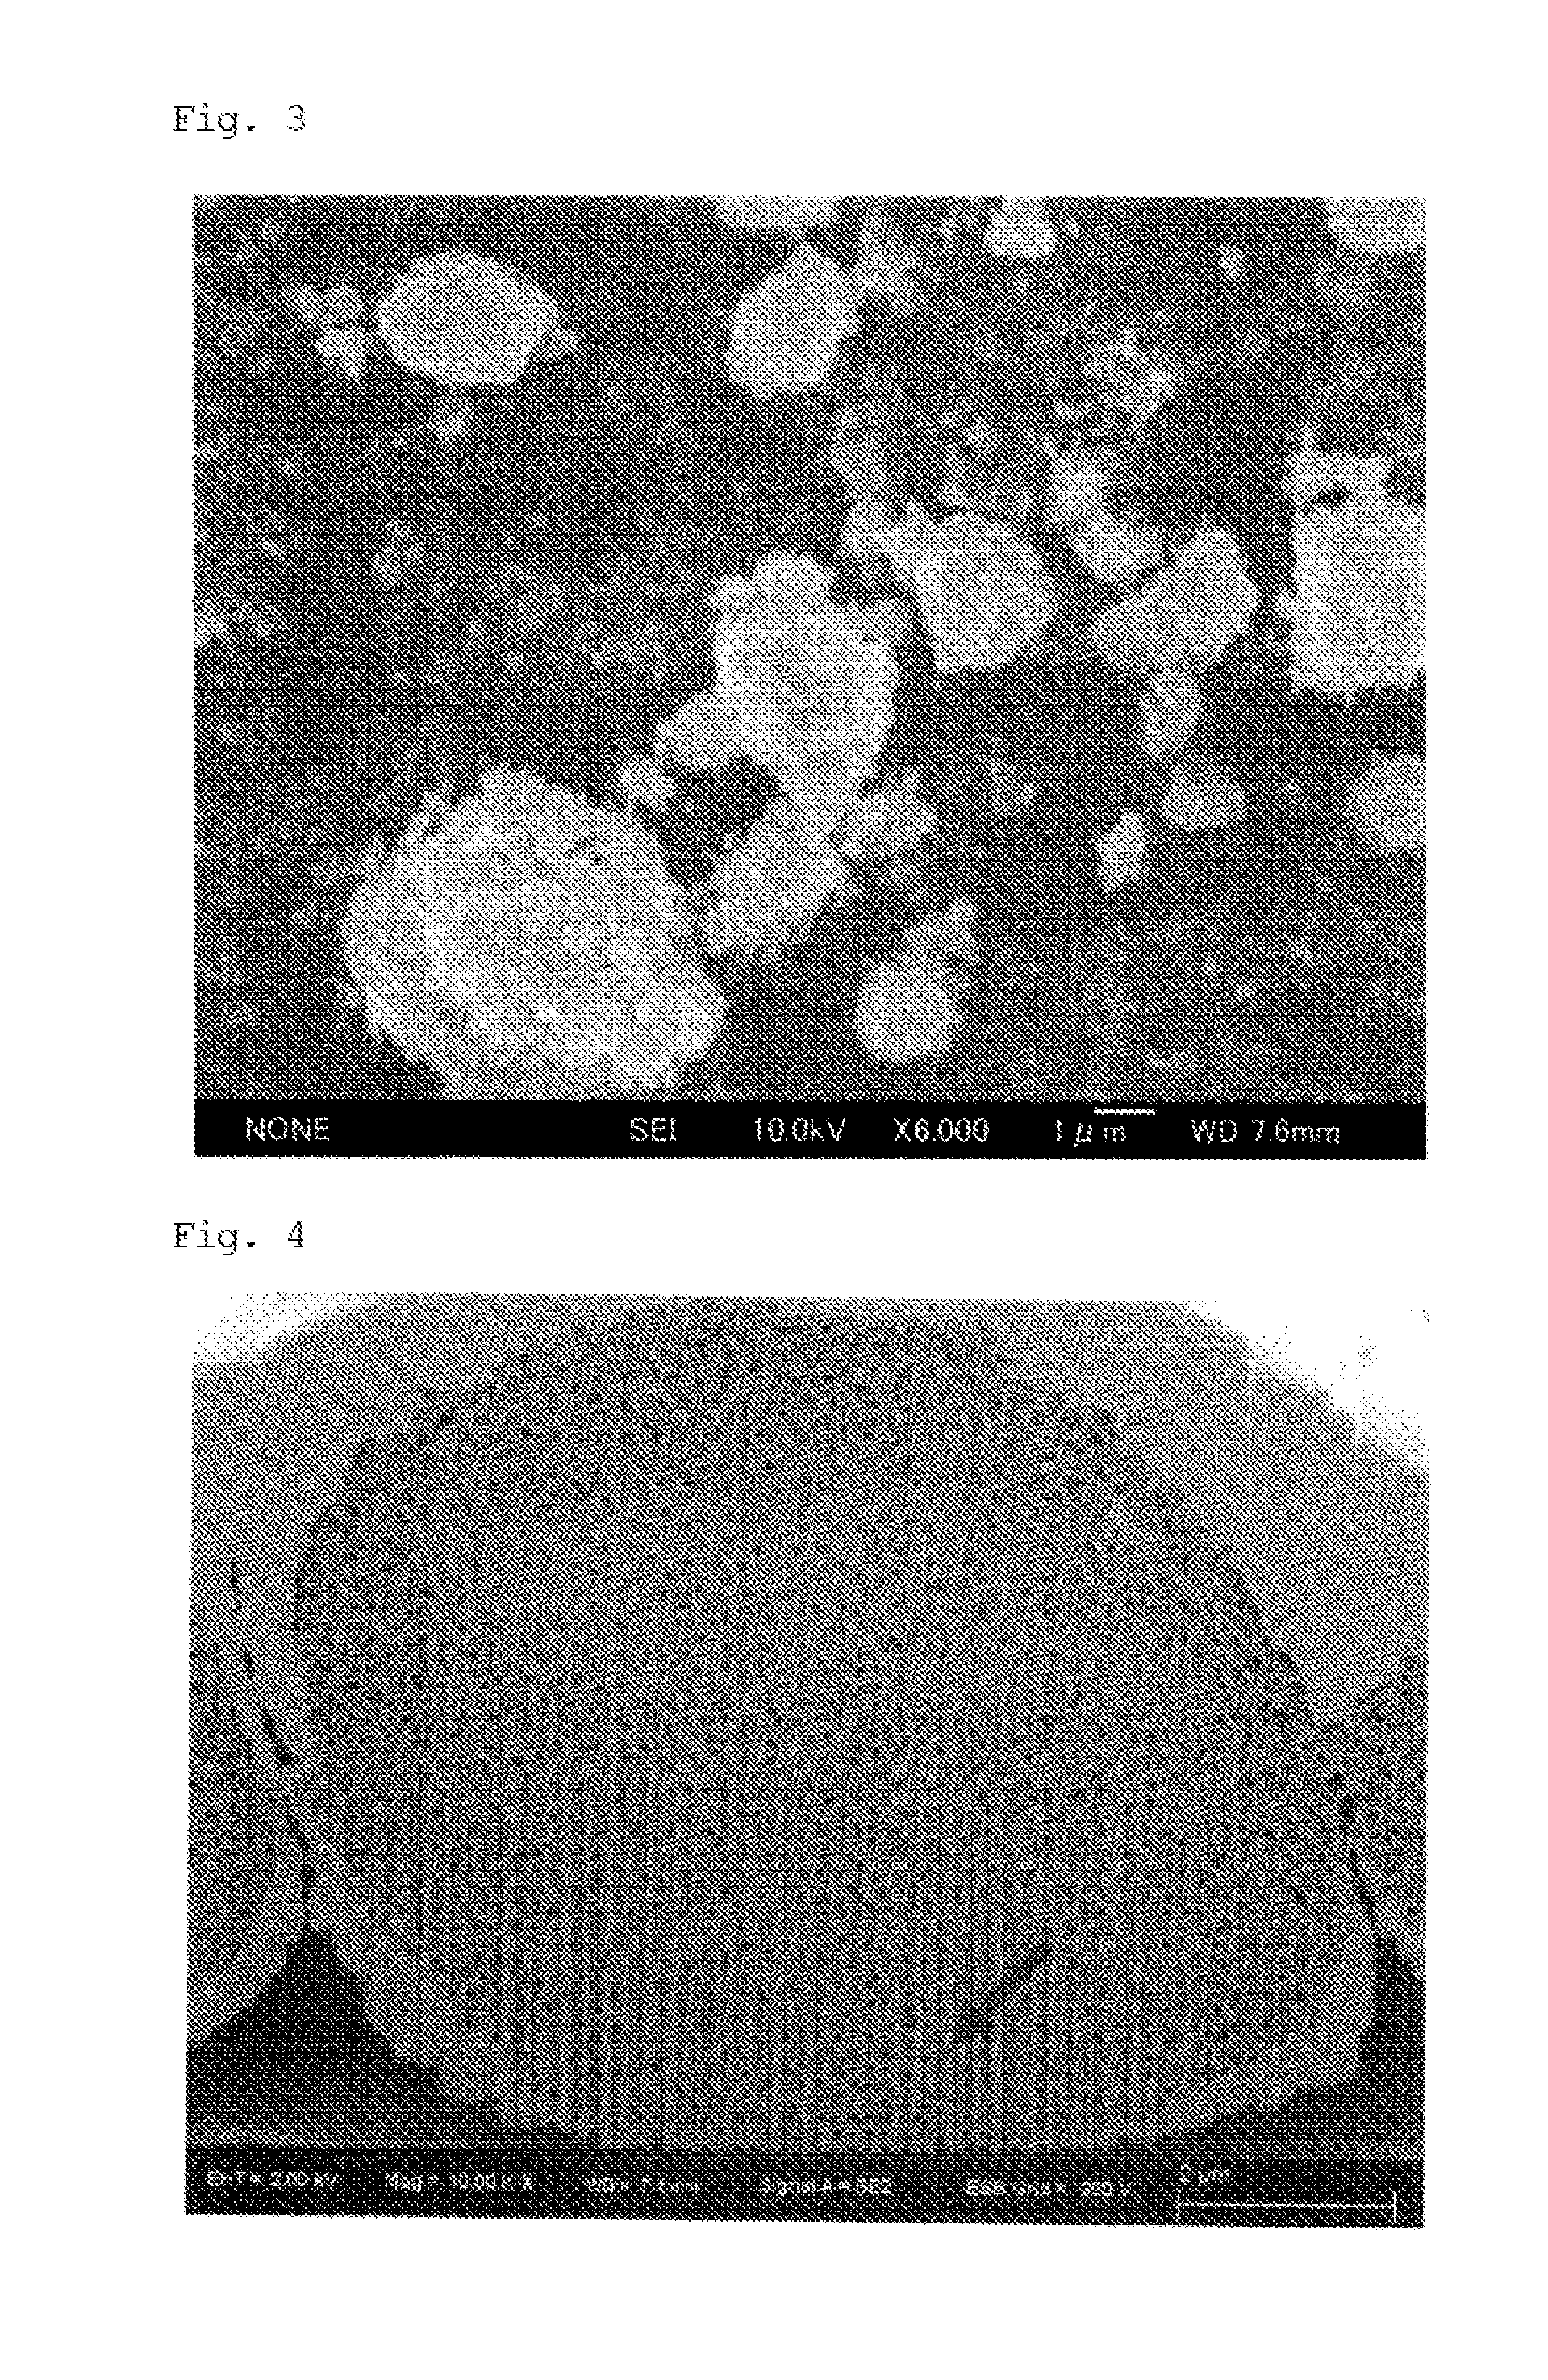 Zirconia-based porous body and method for producing same